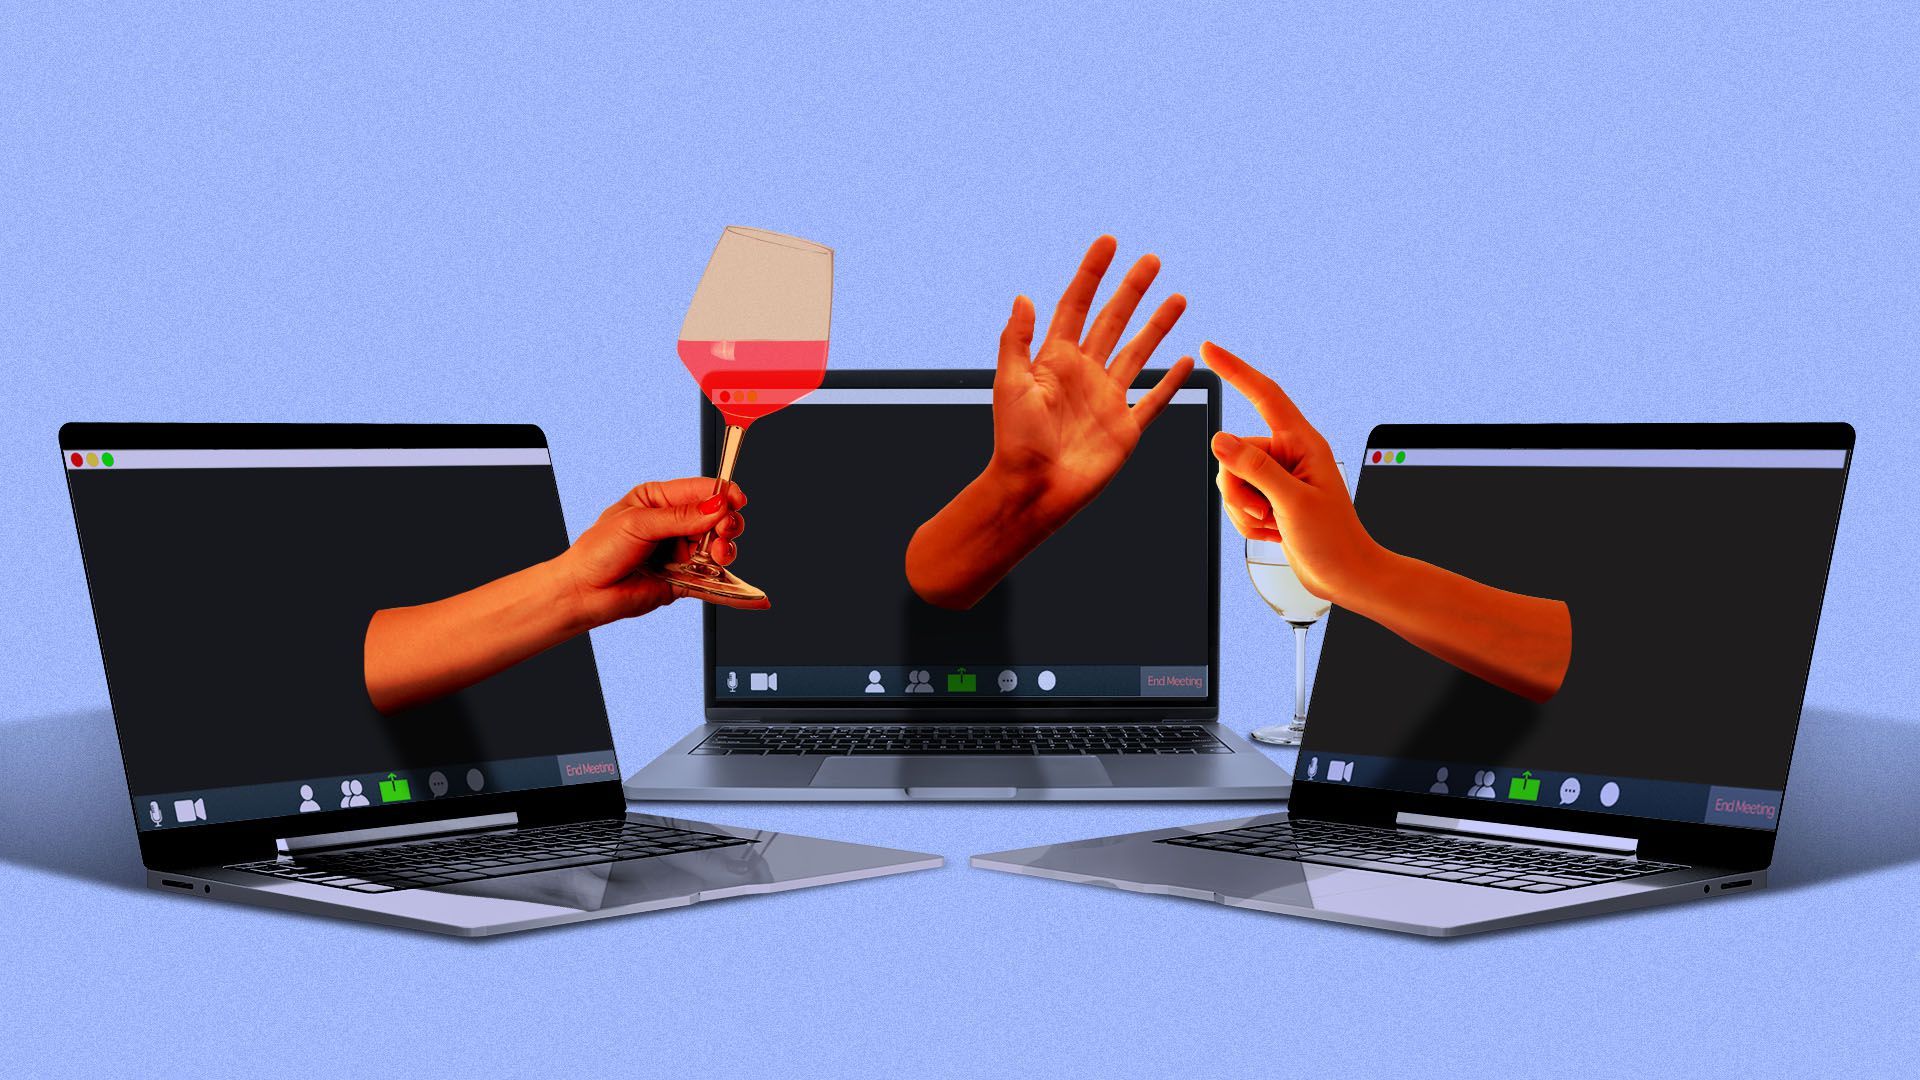 Illustration of three laptops facing each other with hands emerging from the screens interacting with one another 